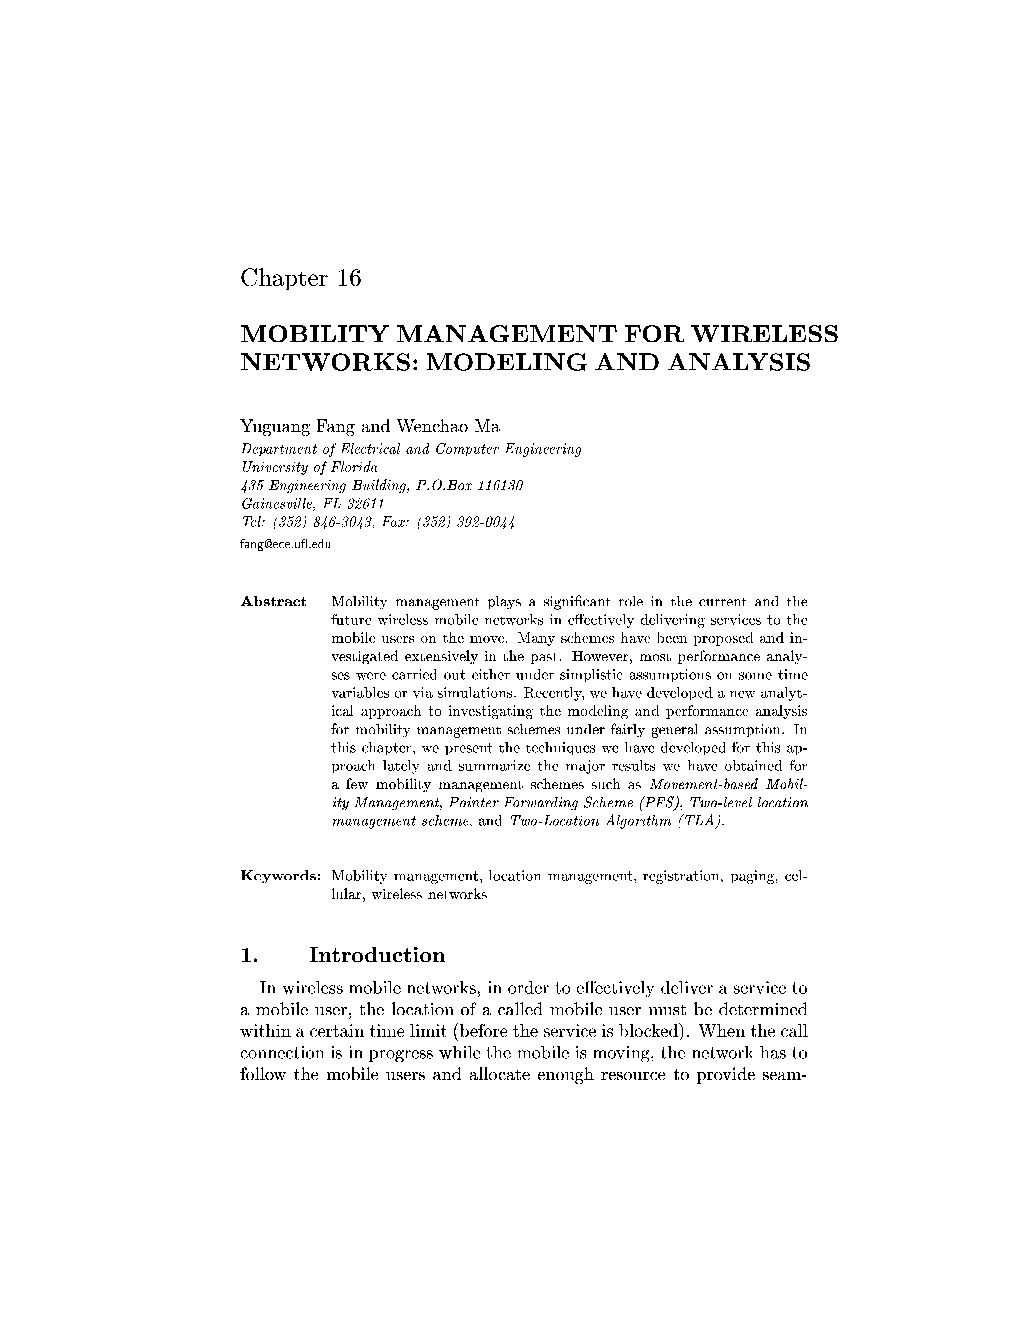 Mobility Management for Wireless Networks: Modeling and Analysis